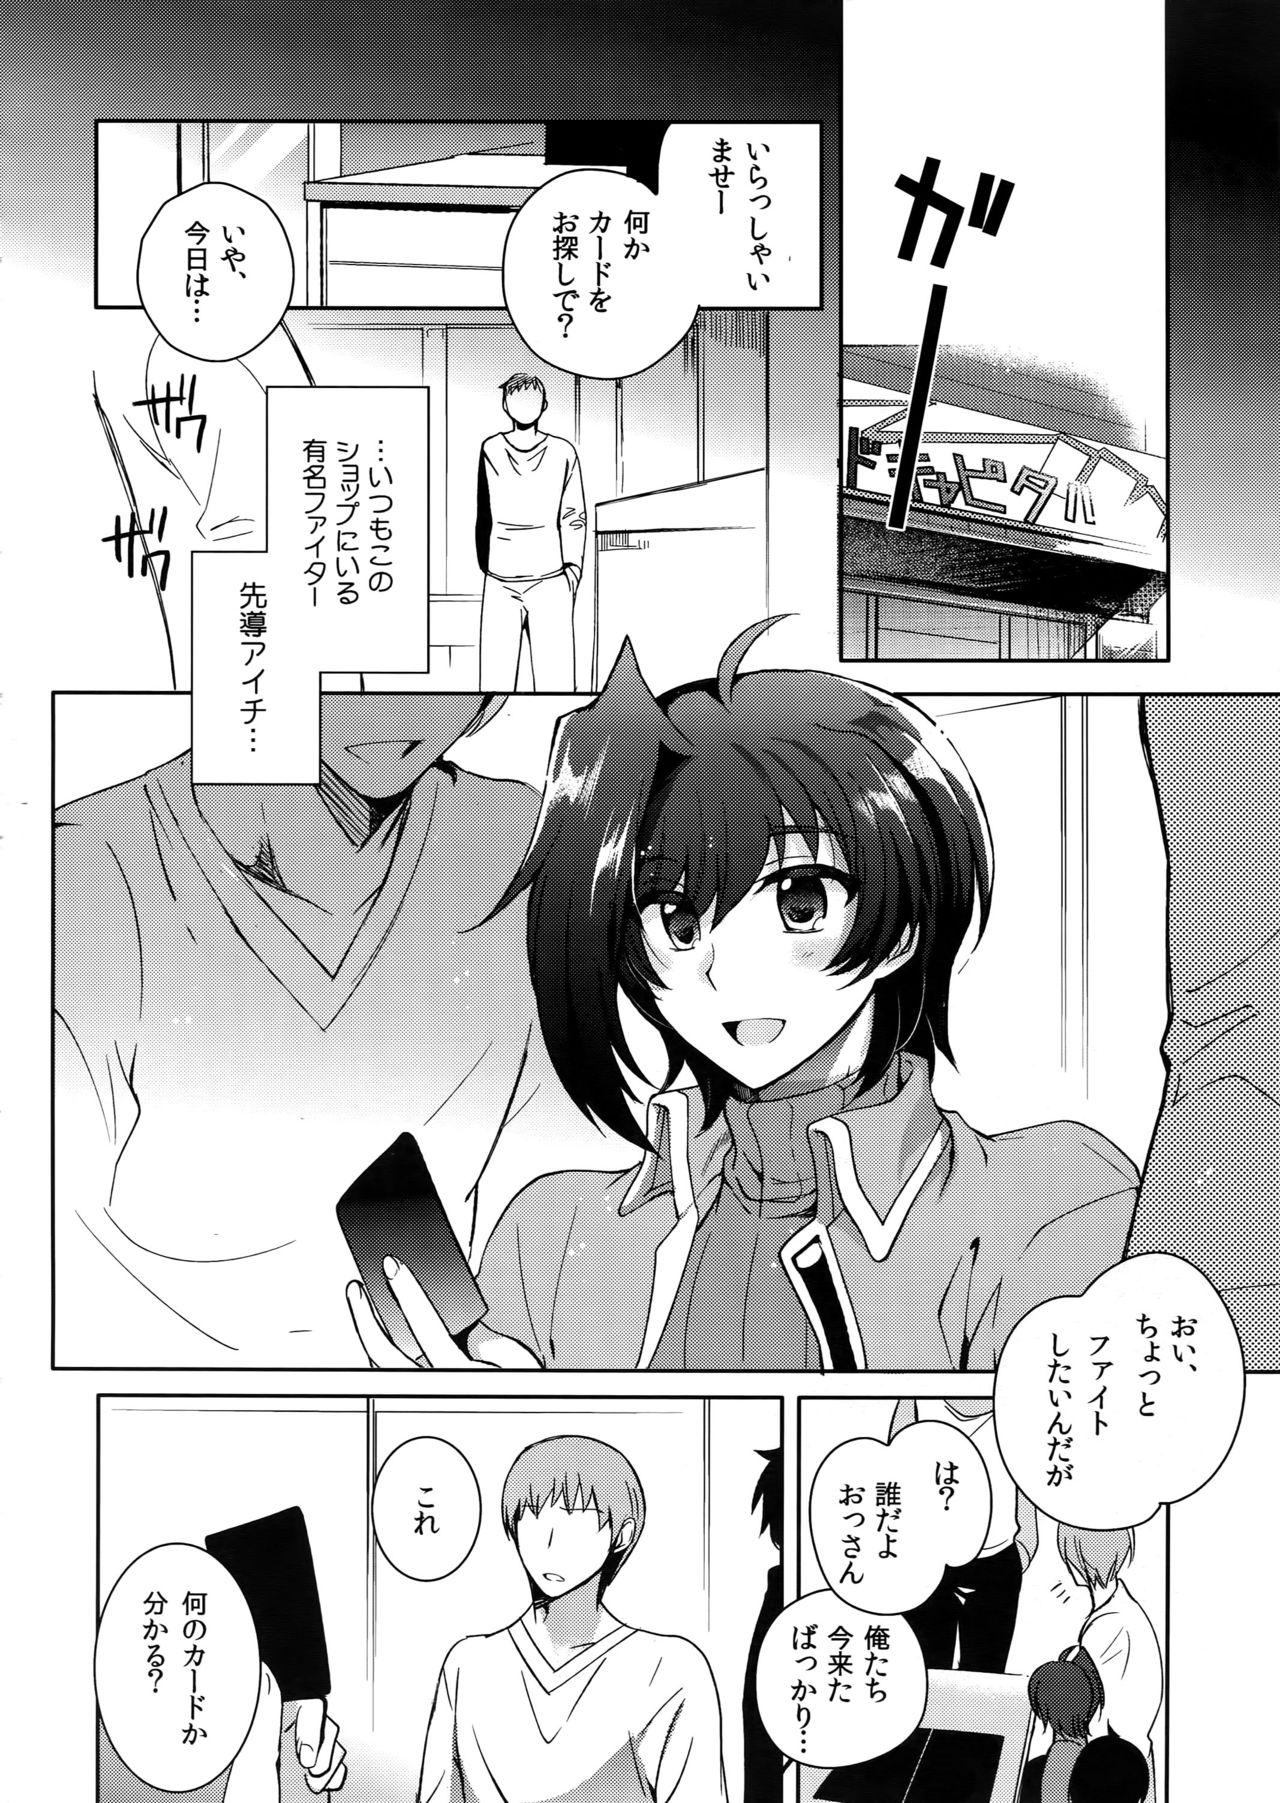 Doggy Style Porn Aichizm - Cardfight vanguard Facesitting - Page 5